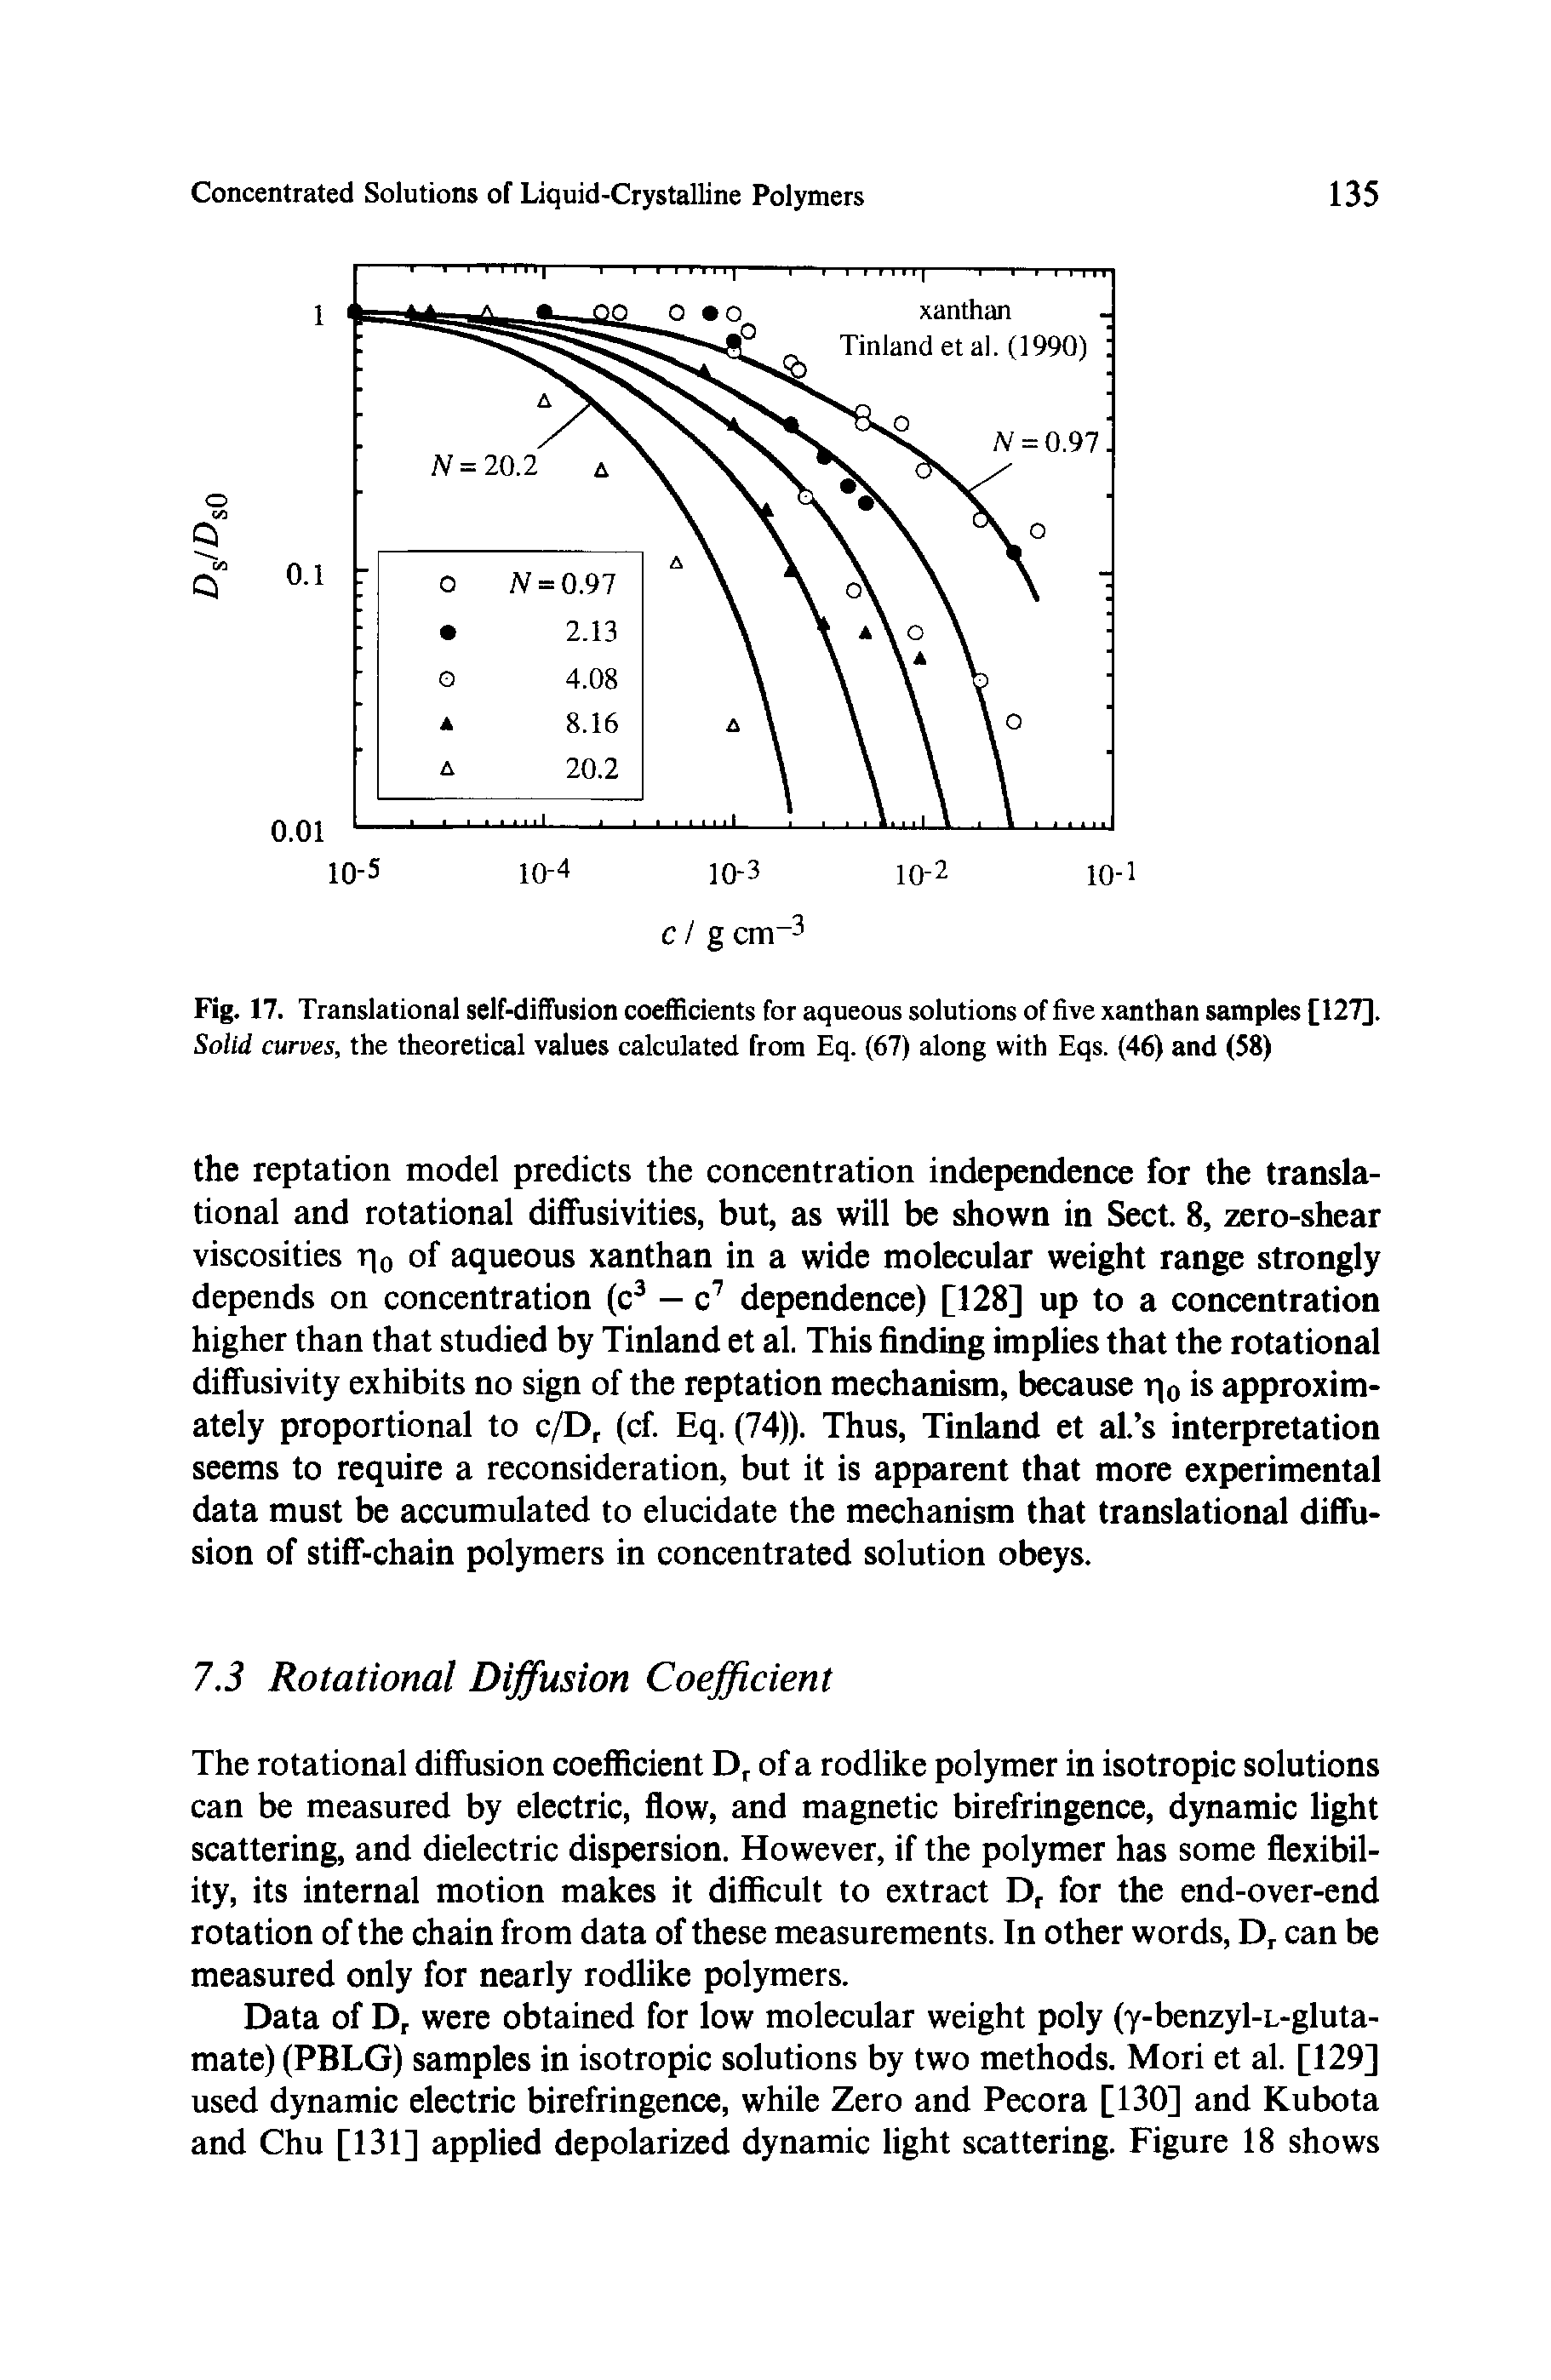 Fig. 17. Translational self-diffusion coefficients for aqueous solutions of five xanthan samples [127], Solid curves, the theoretical values calculated from Eq. (67) along with Eqs. (46) and (58)...